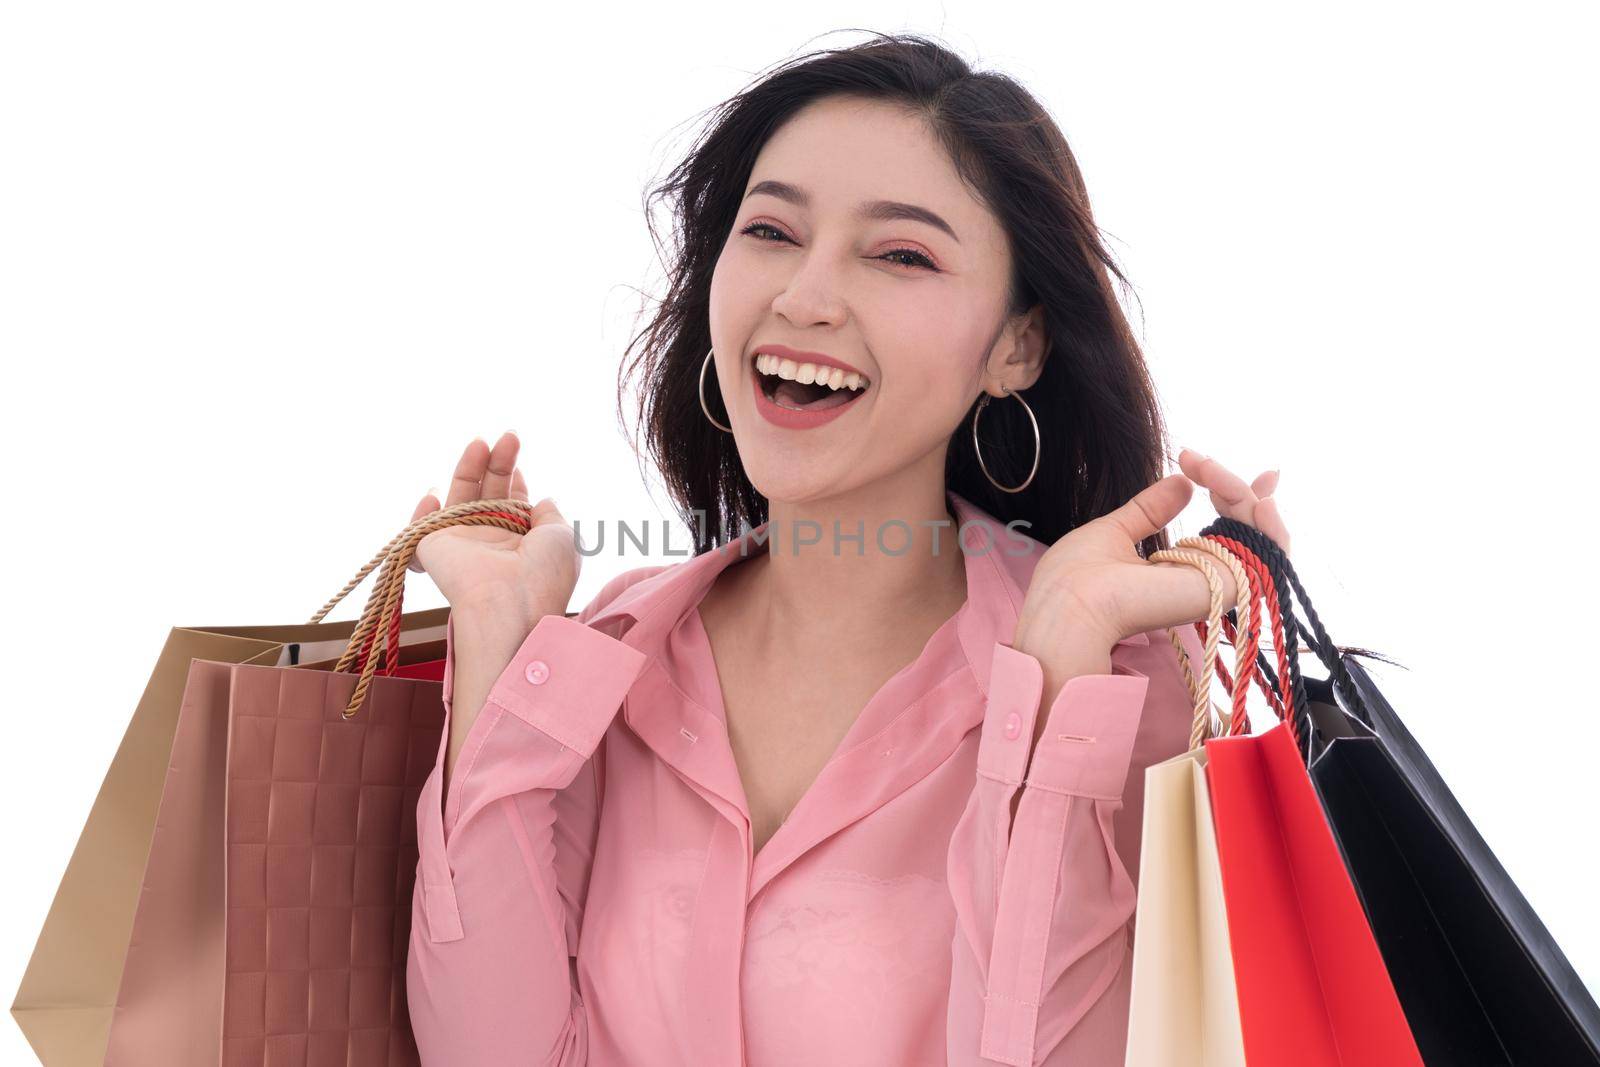 cheerful young woman holding shopping bag isolated on a white background